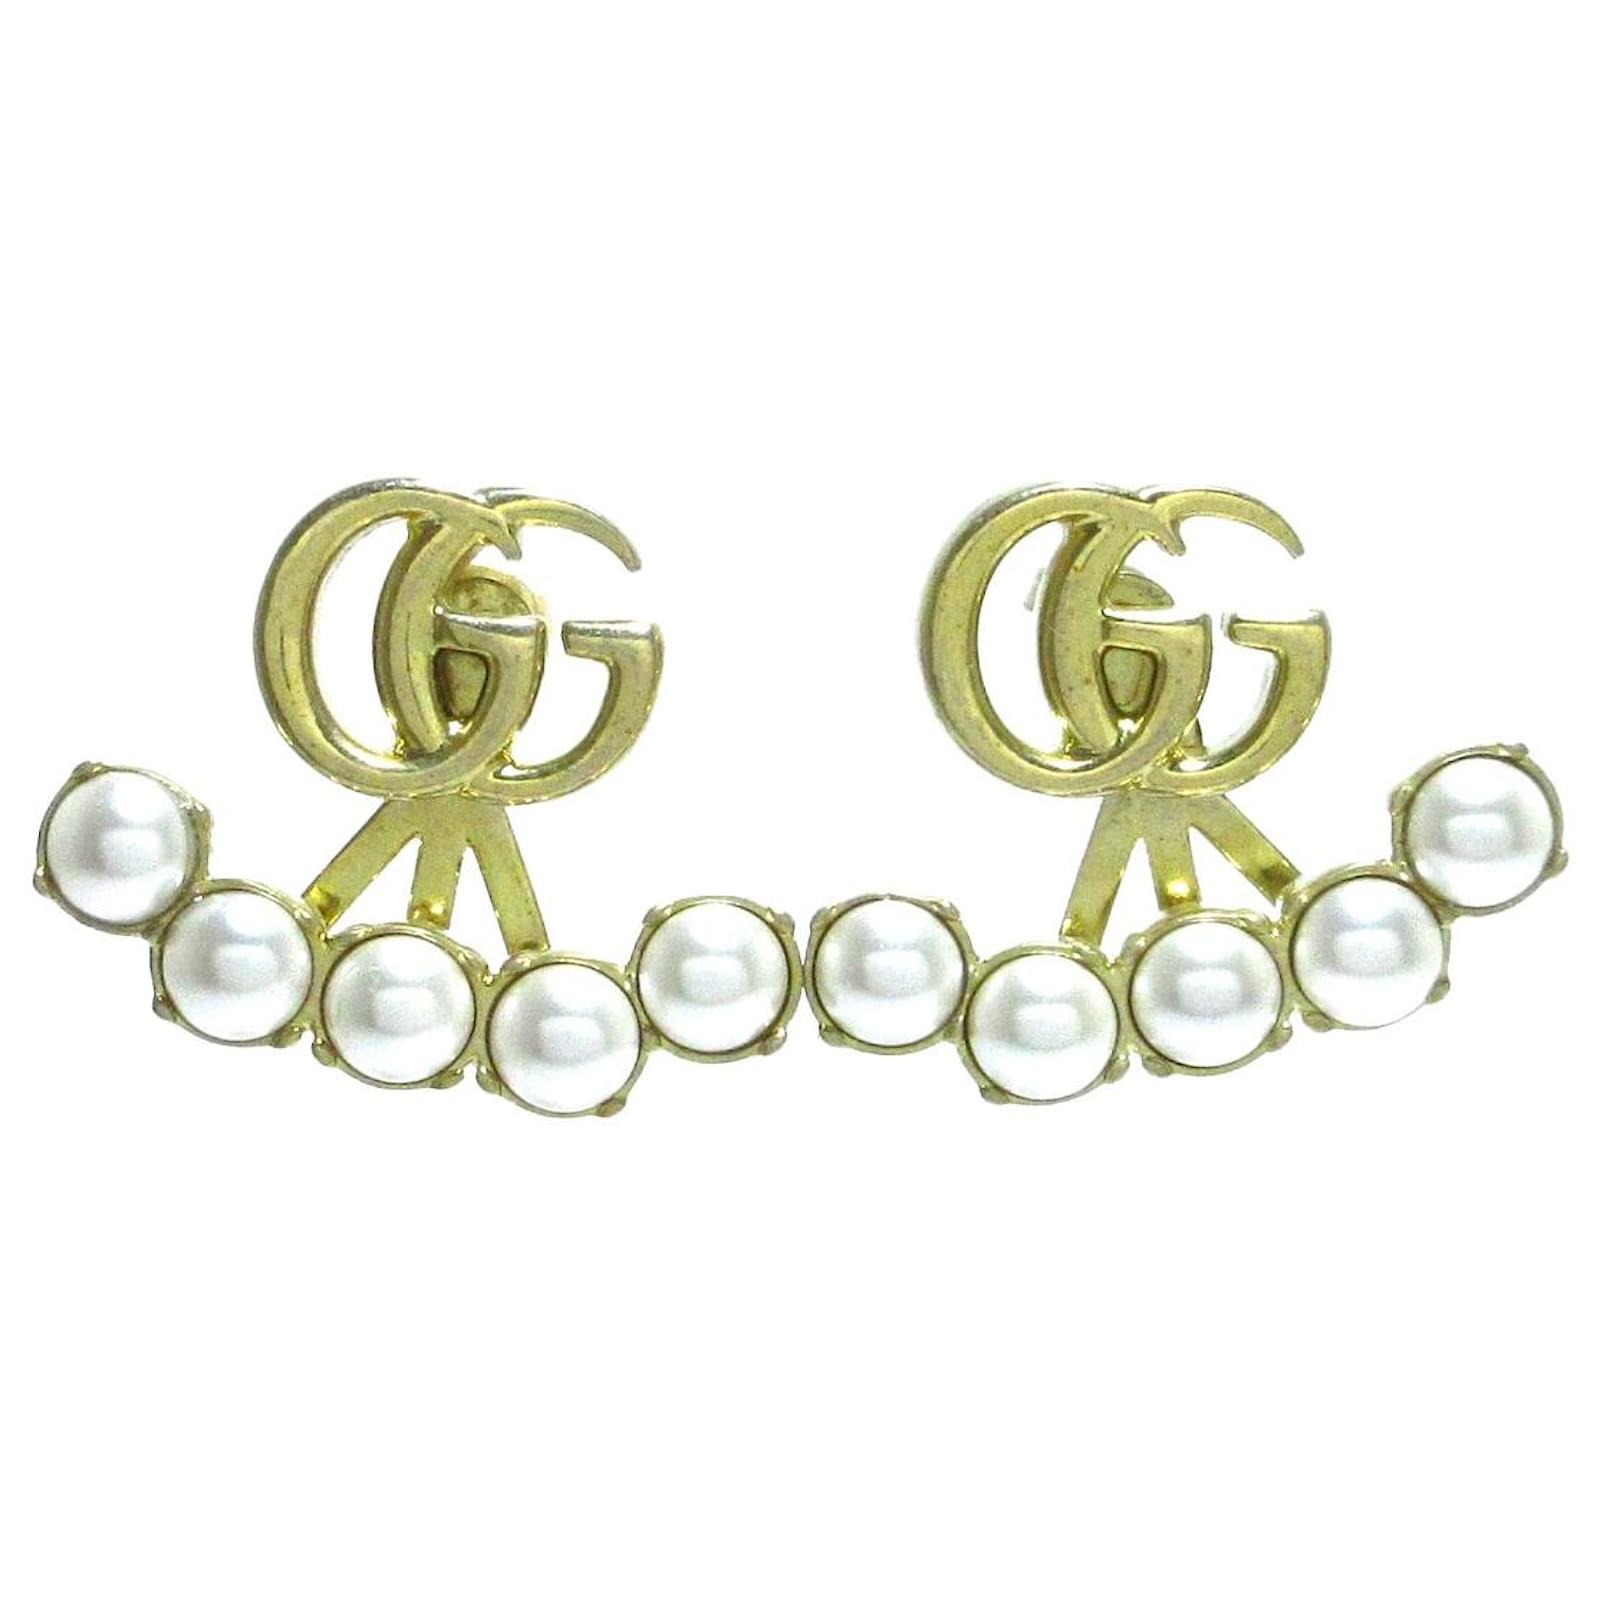 Gucci Pearl Double G Earrings - Gold